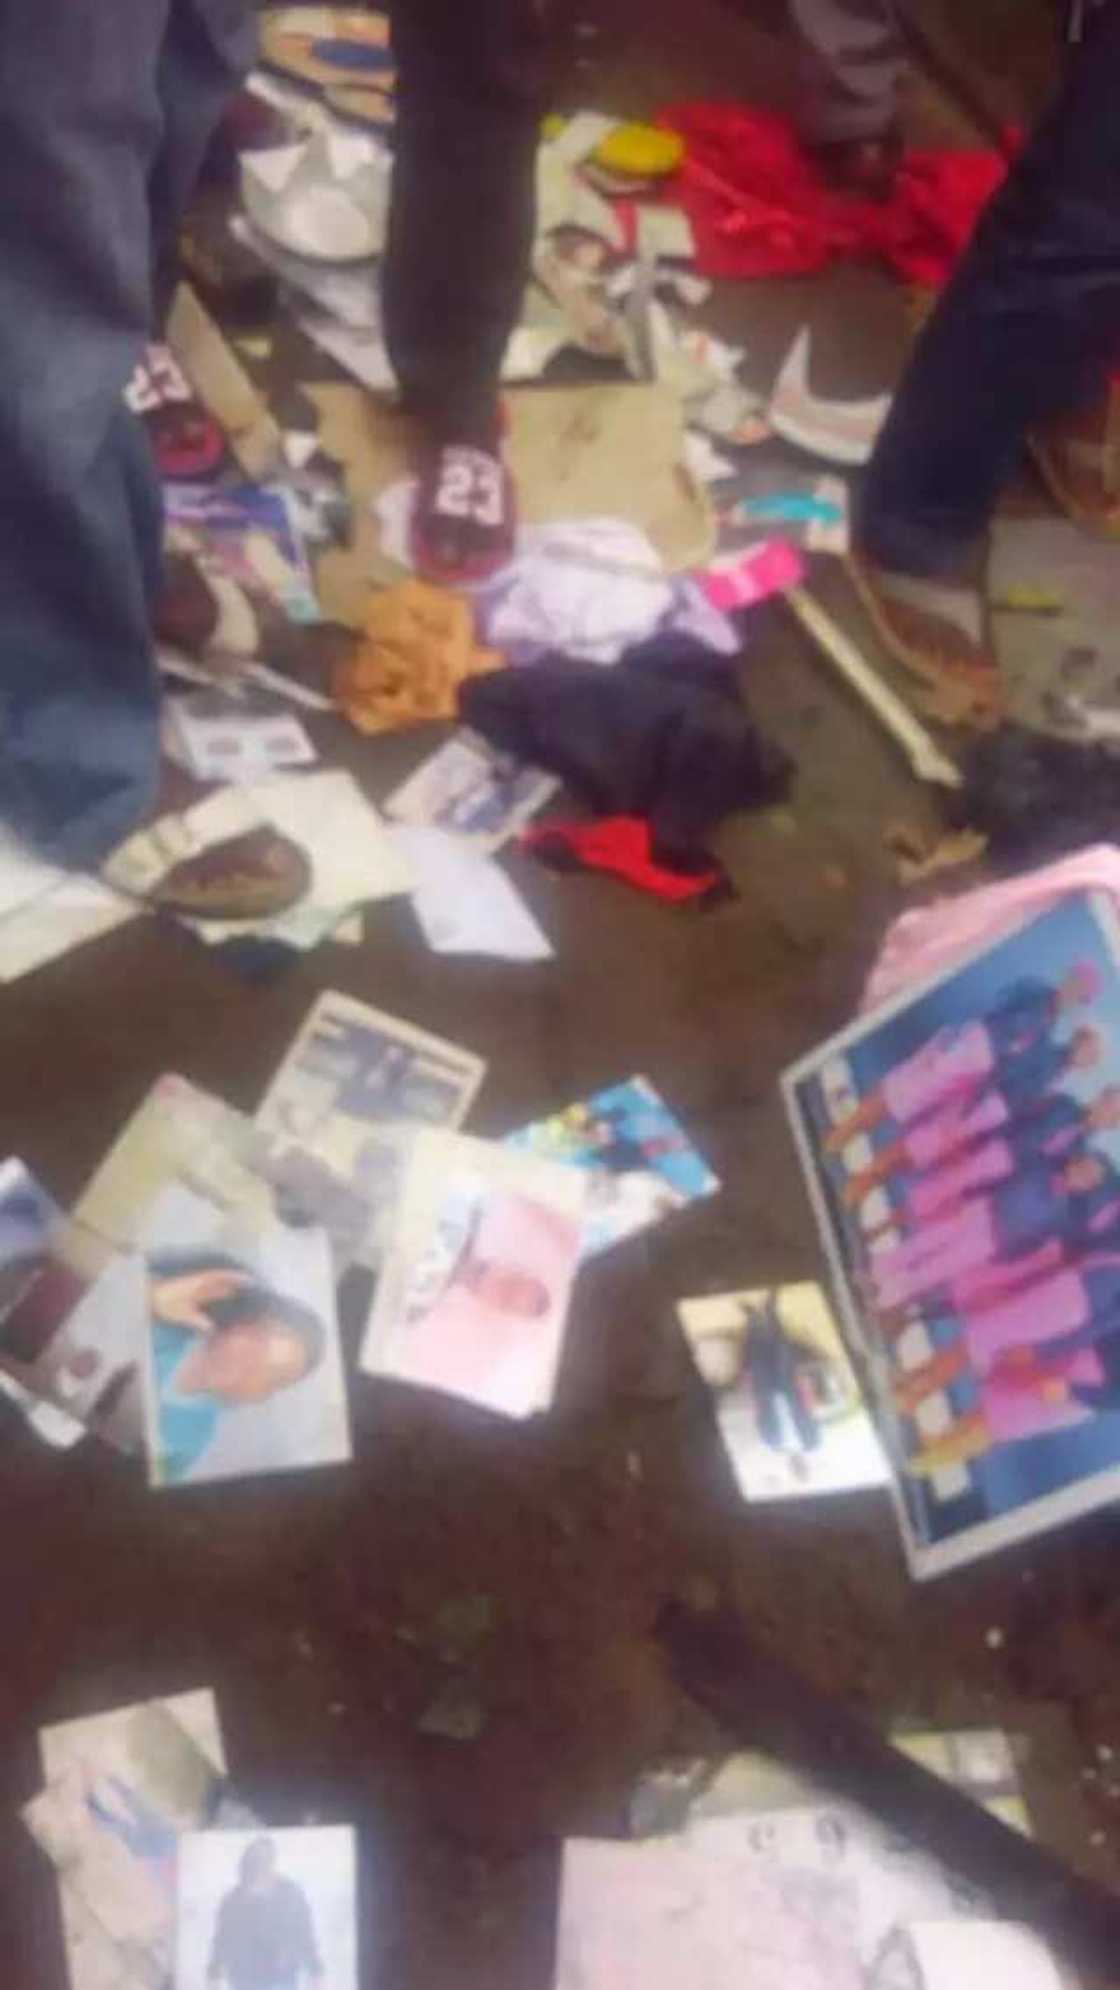 Angry mob destroys church after pastor allegedly murdered a baby (photos)